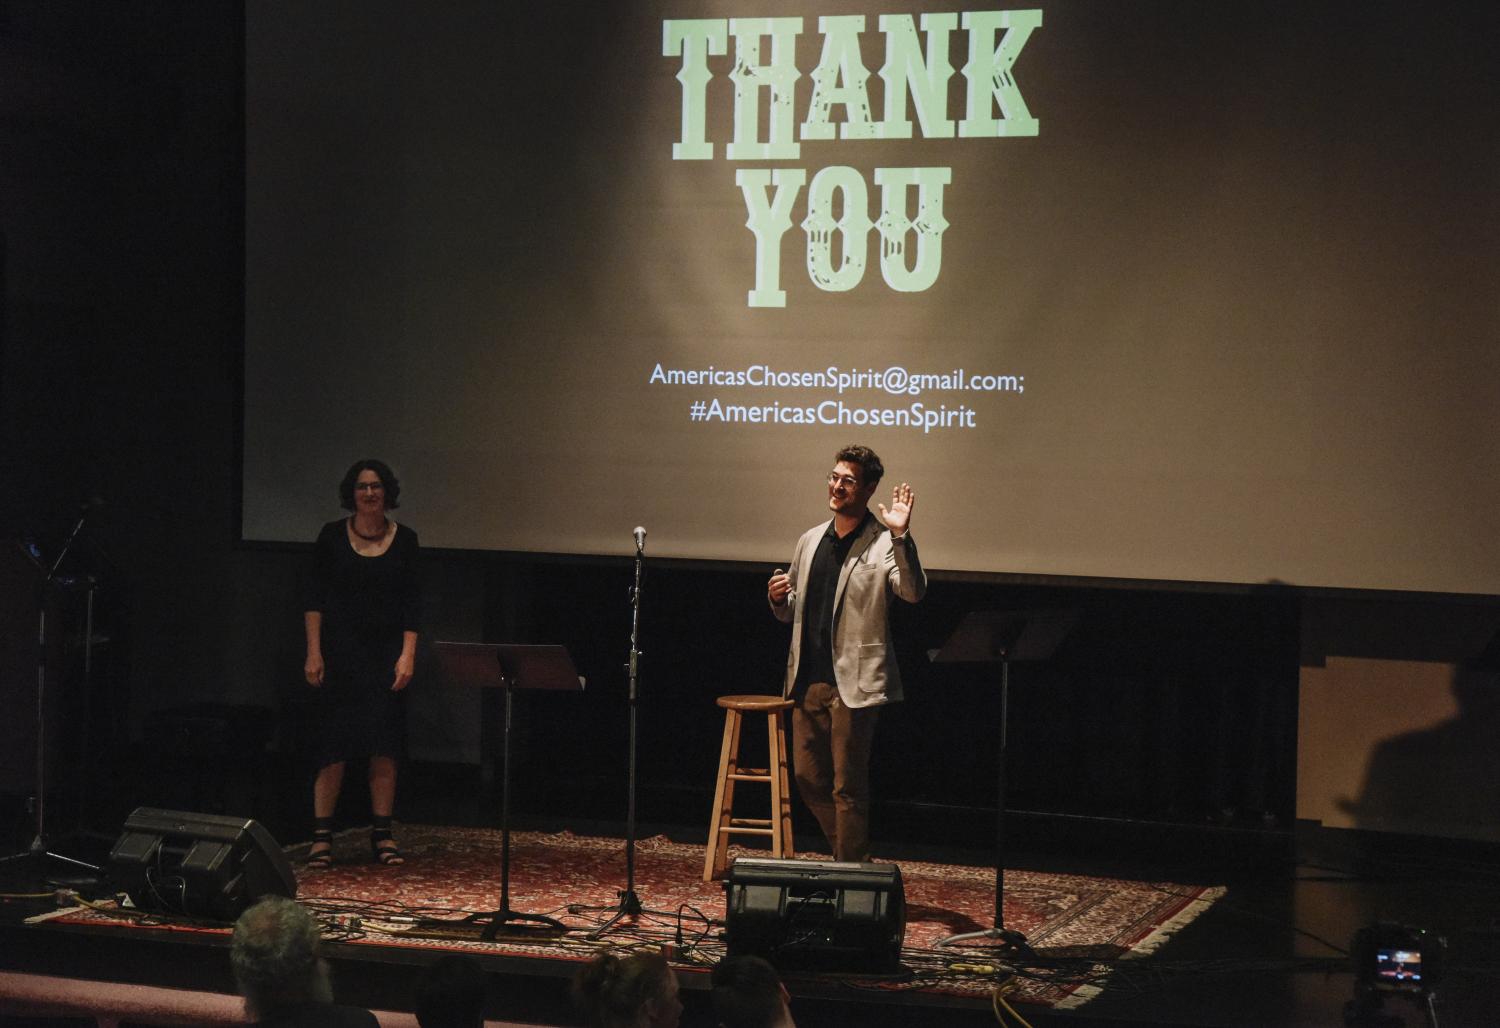 Janice Fernheimer and JT Waldman standing on stage, a "thank you" on the screen behind them